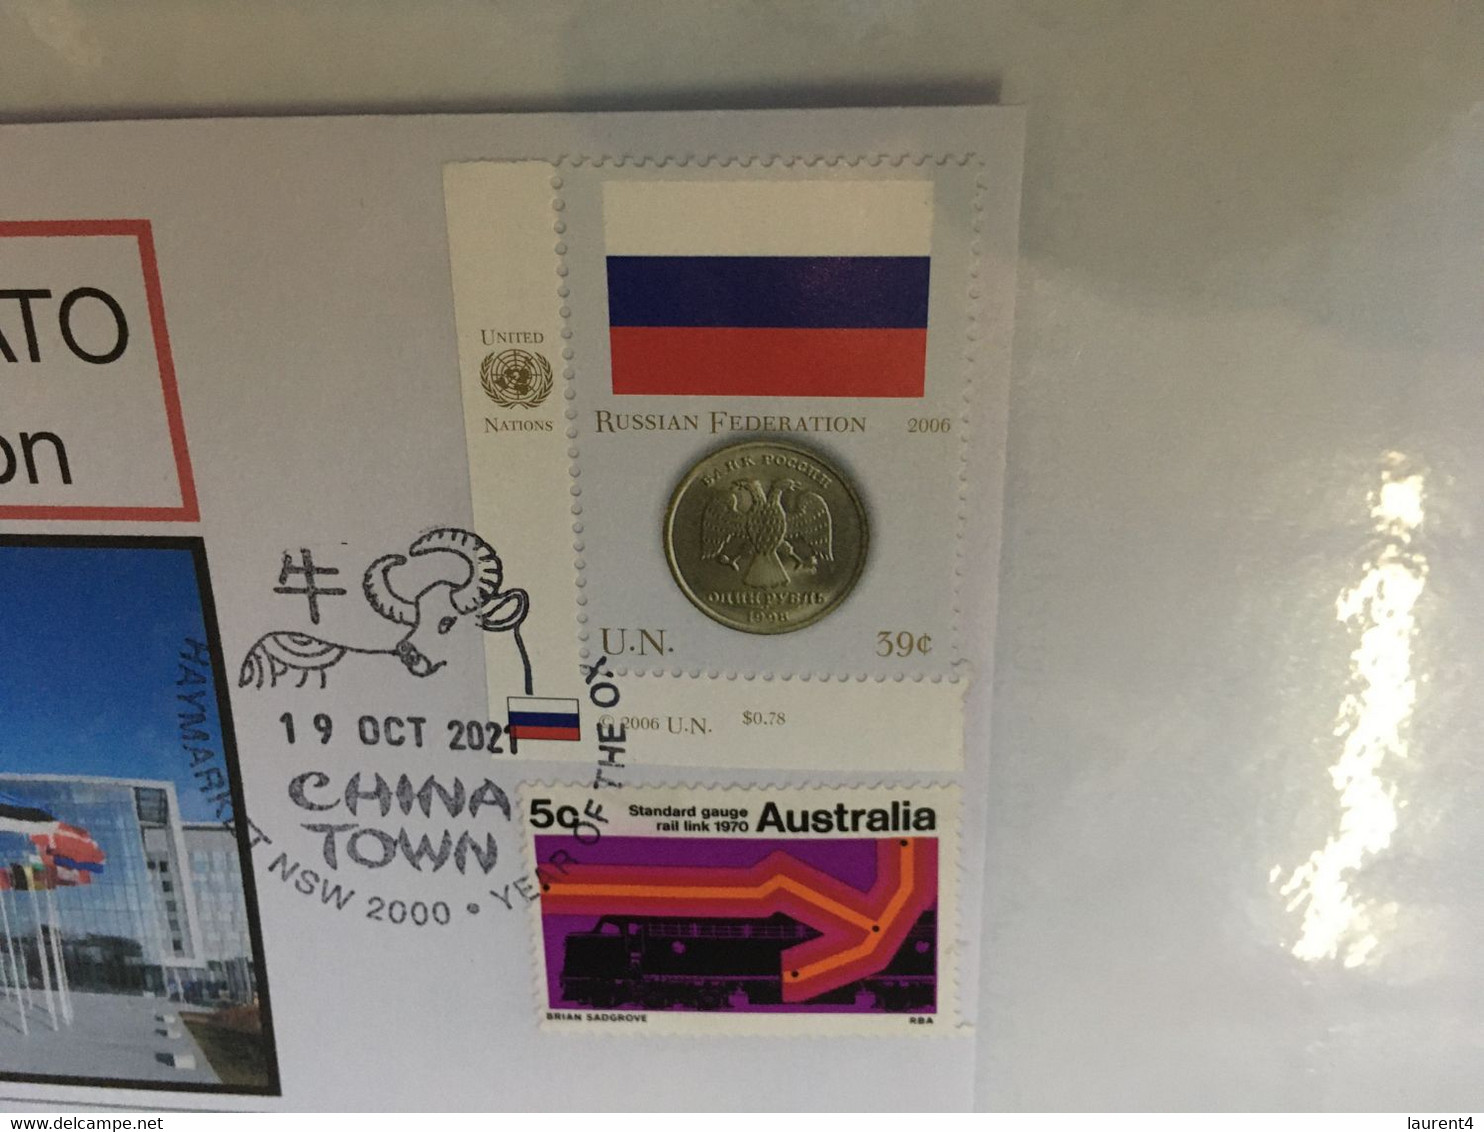 (6 A 2) Special Commemorative Cover - 19 Oct 2021 (Australia) Russia / NATO - Diplomatic Mission Ending - Russia Flag + - Covers & Documents